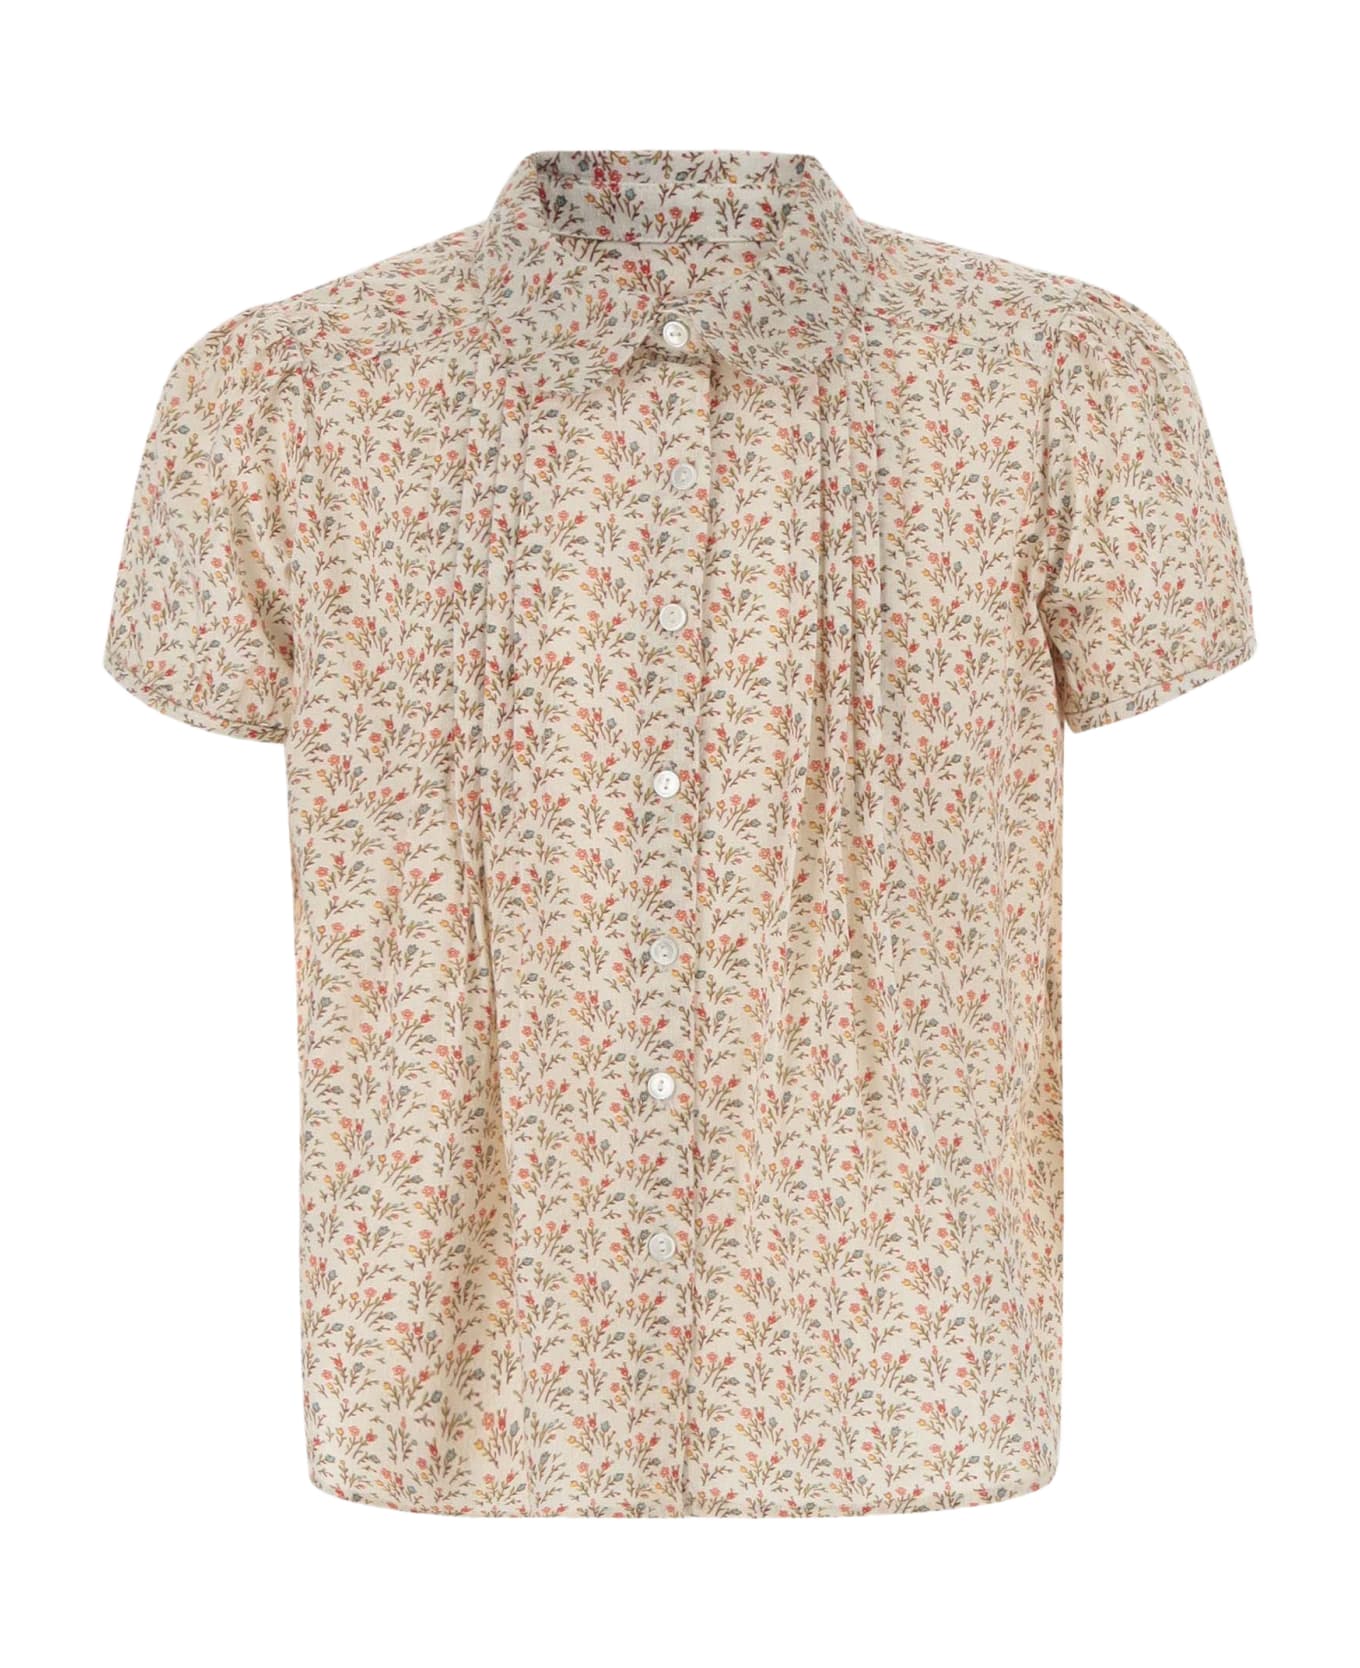 Bonpoint Cotton Shirt With Floral Pattern - Red